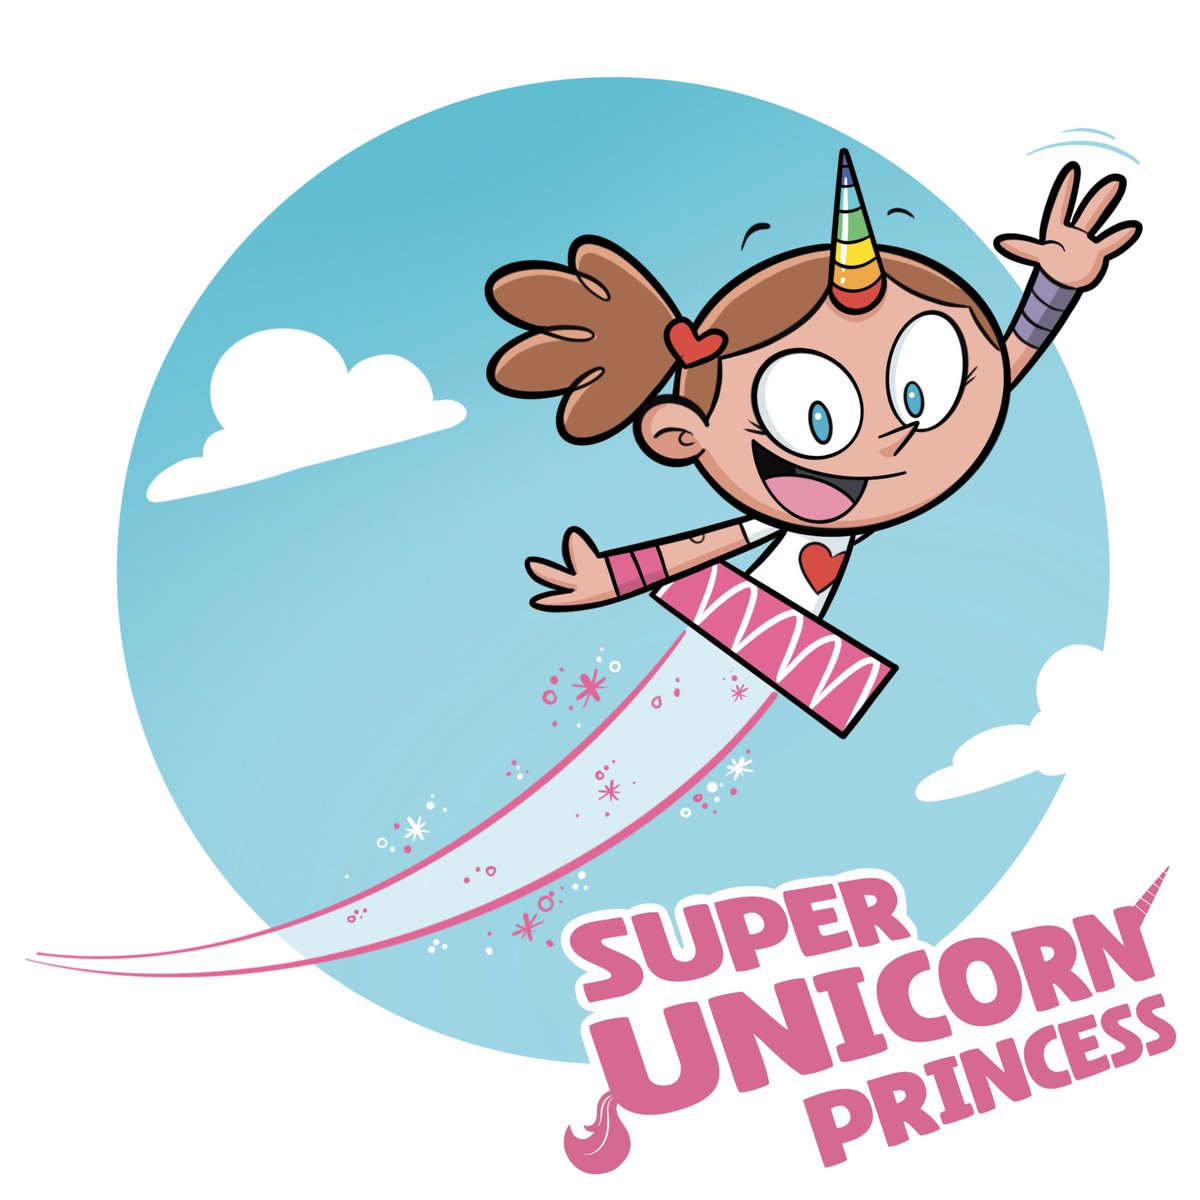 Who’s the girl in the pink frilly dress? Why of course it’s Super Unicorn Princess!

#superunicornprincess #sup #graphicnovel #comics #middlegrade #kidlit #kidlitart